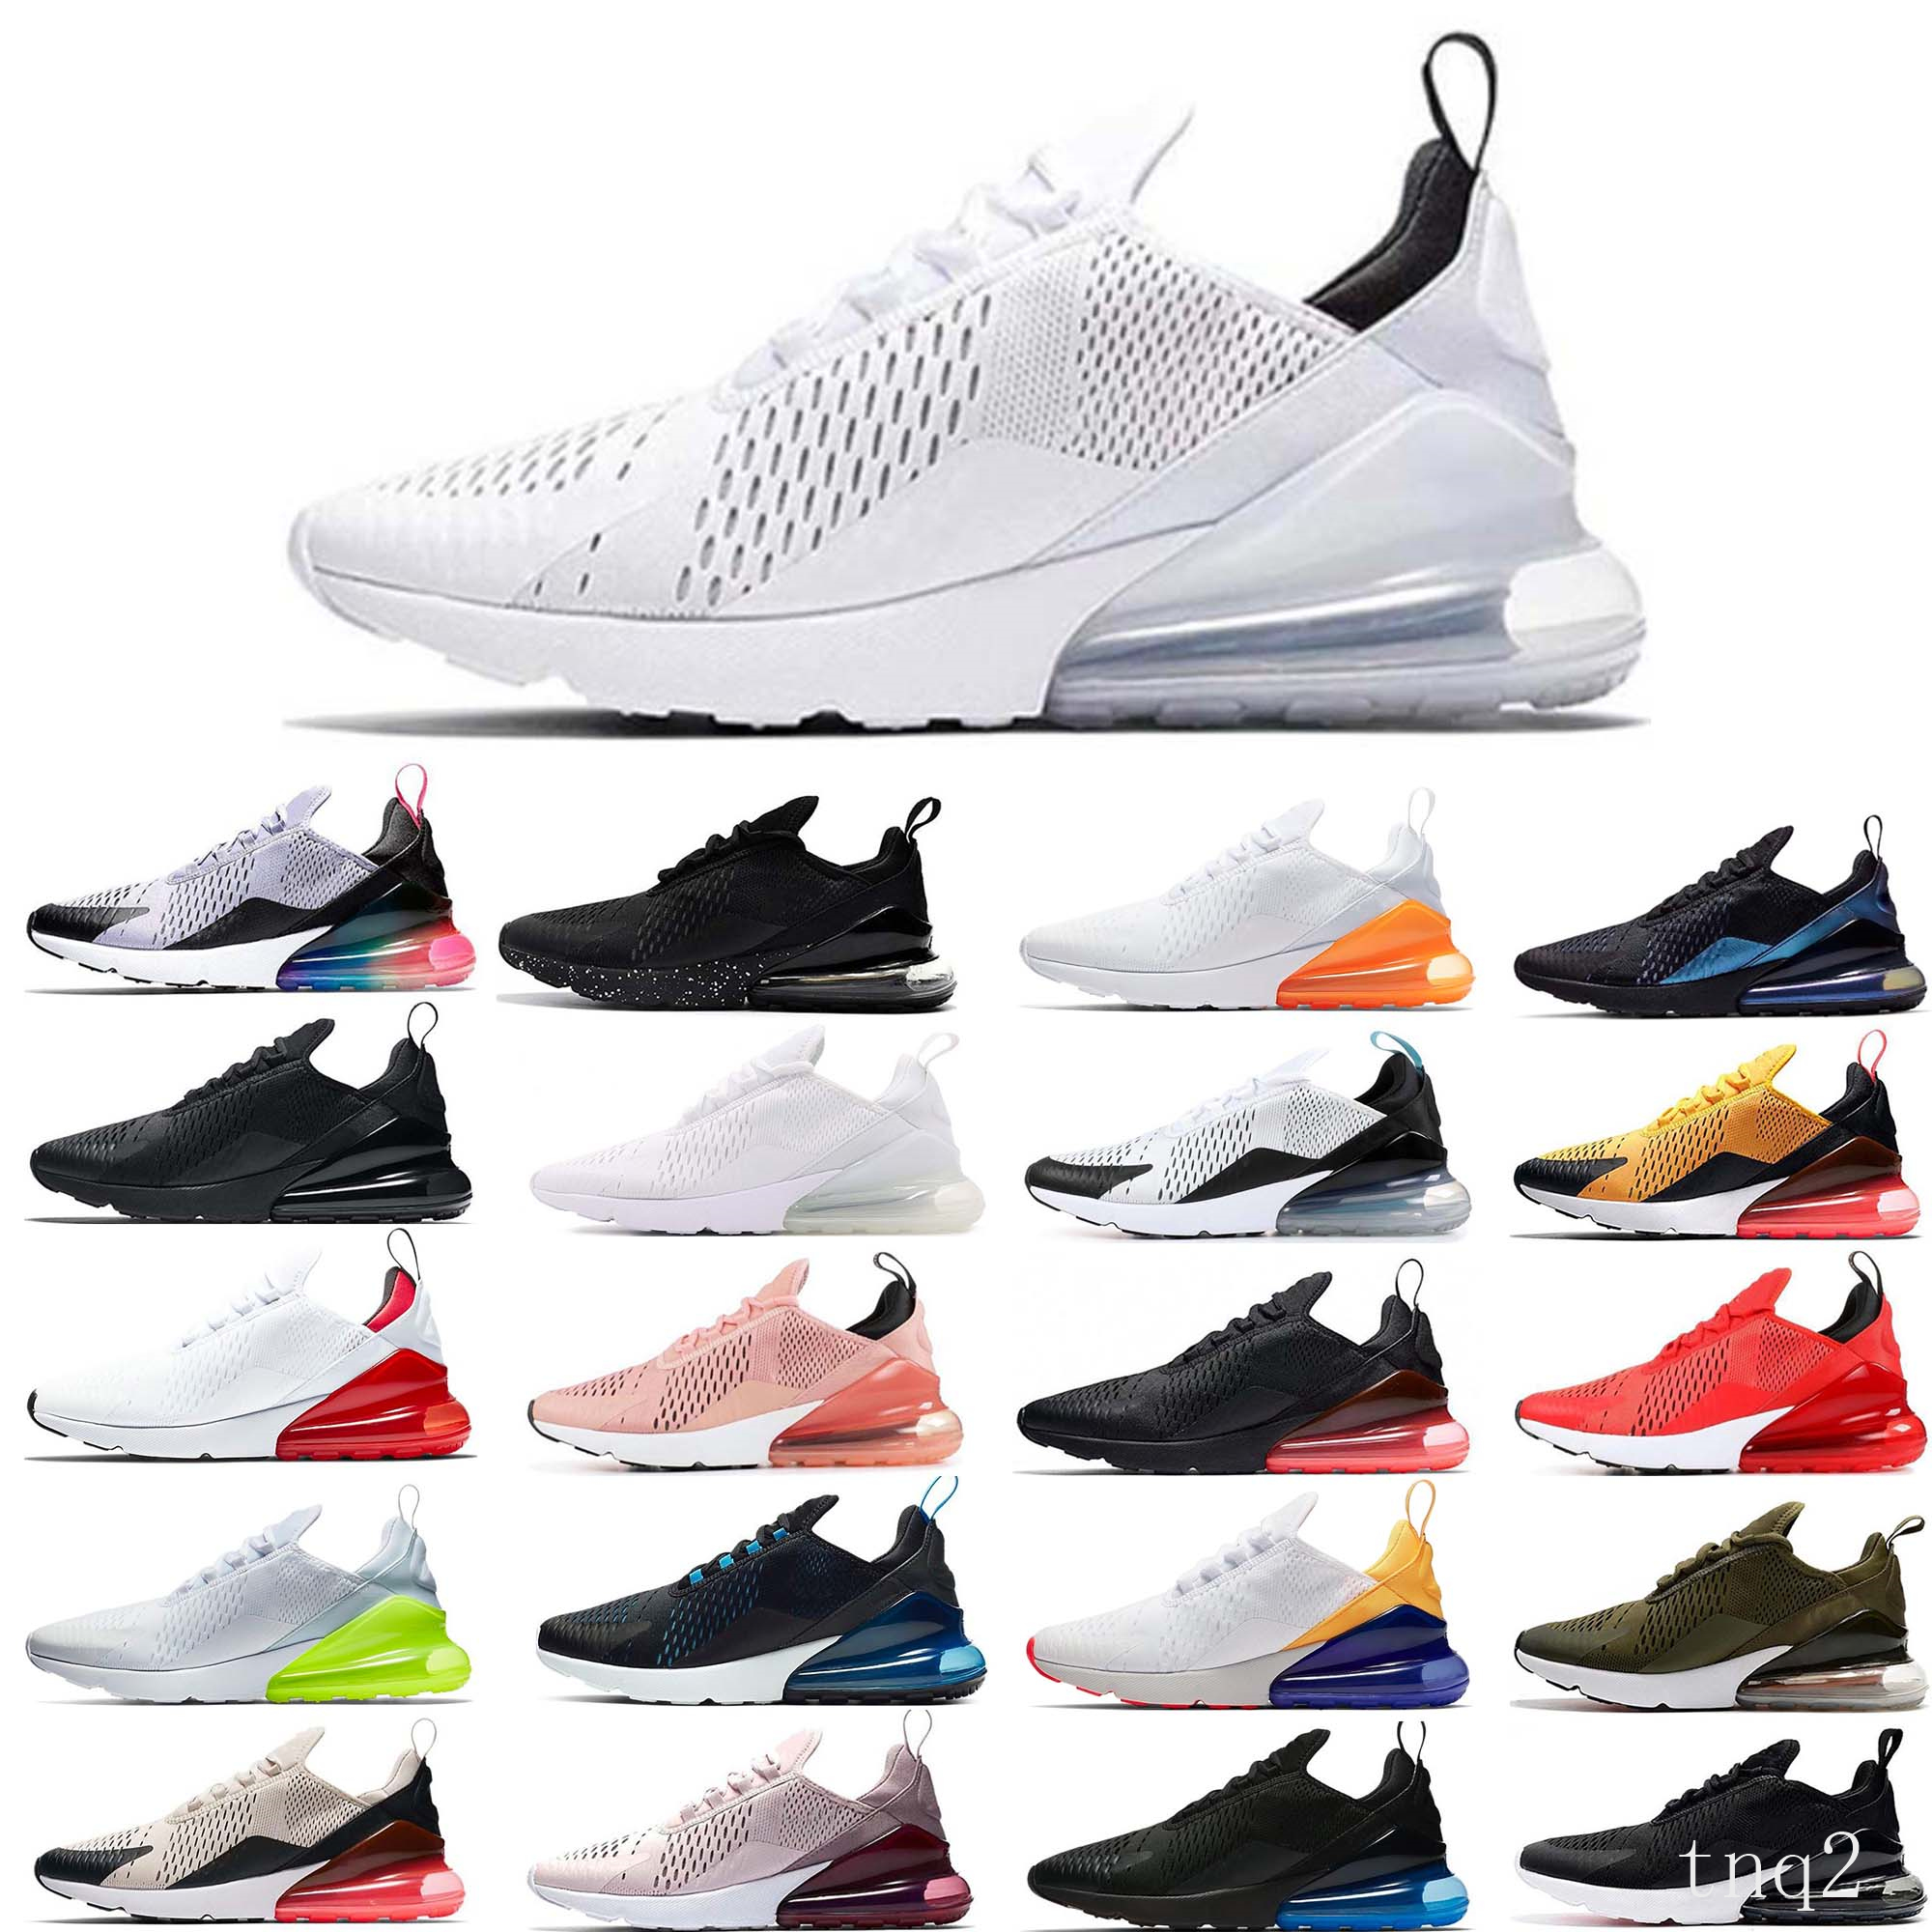 

Mens Sneakers Run Shoes Triple White Red black South Beach 27 Womens Sports Trainers Fashion Size 36-45, Color 10